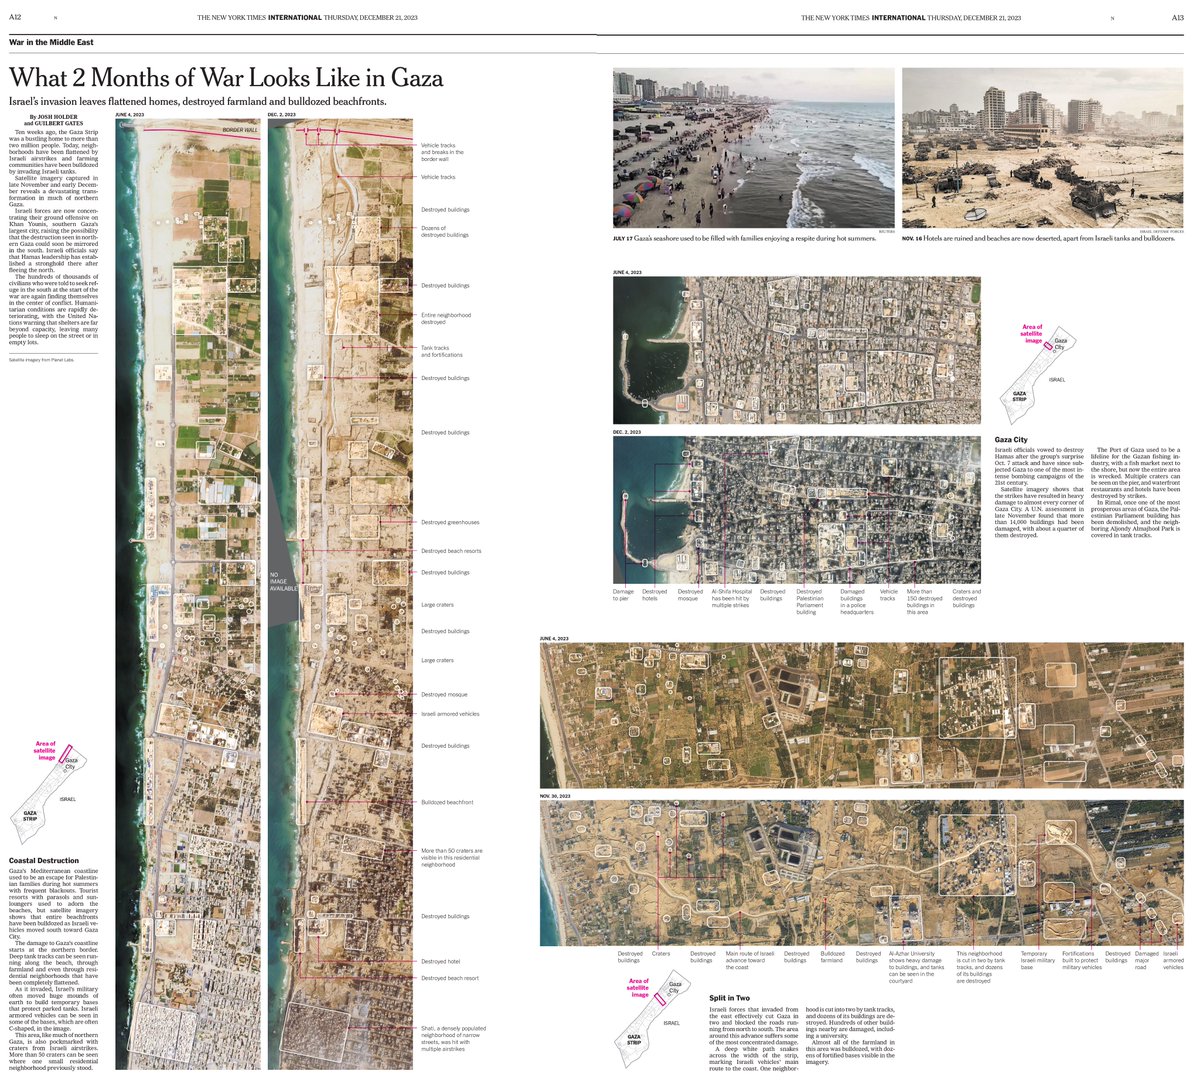 ‘What 2 Months of War Looks Like in Gaza’ is in today’s print @nytimes. Satellite imagery shows the dramatic transformation of three areas of Gaza, with flattened homes, tank tracks through farmland and bulldozed beachfronts.